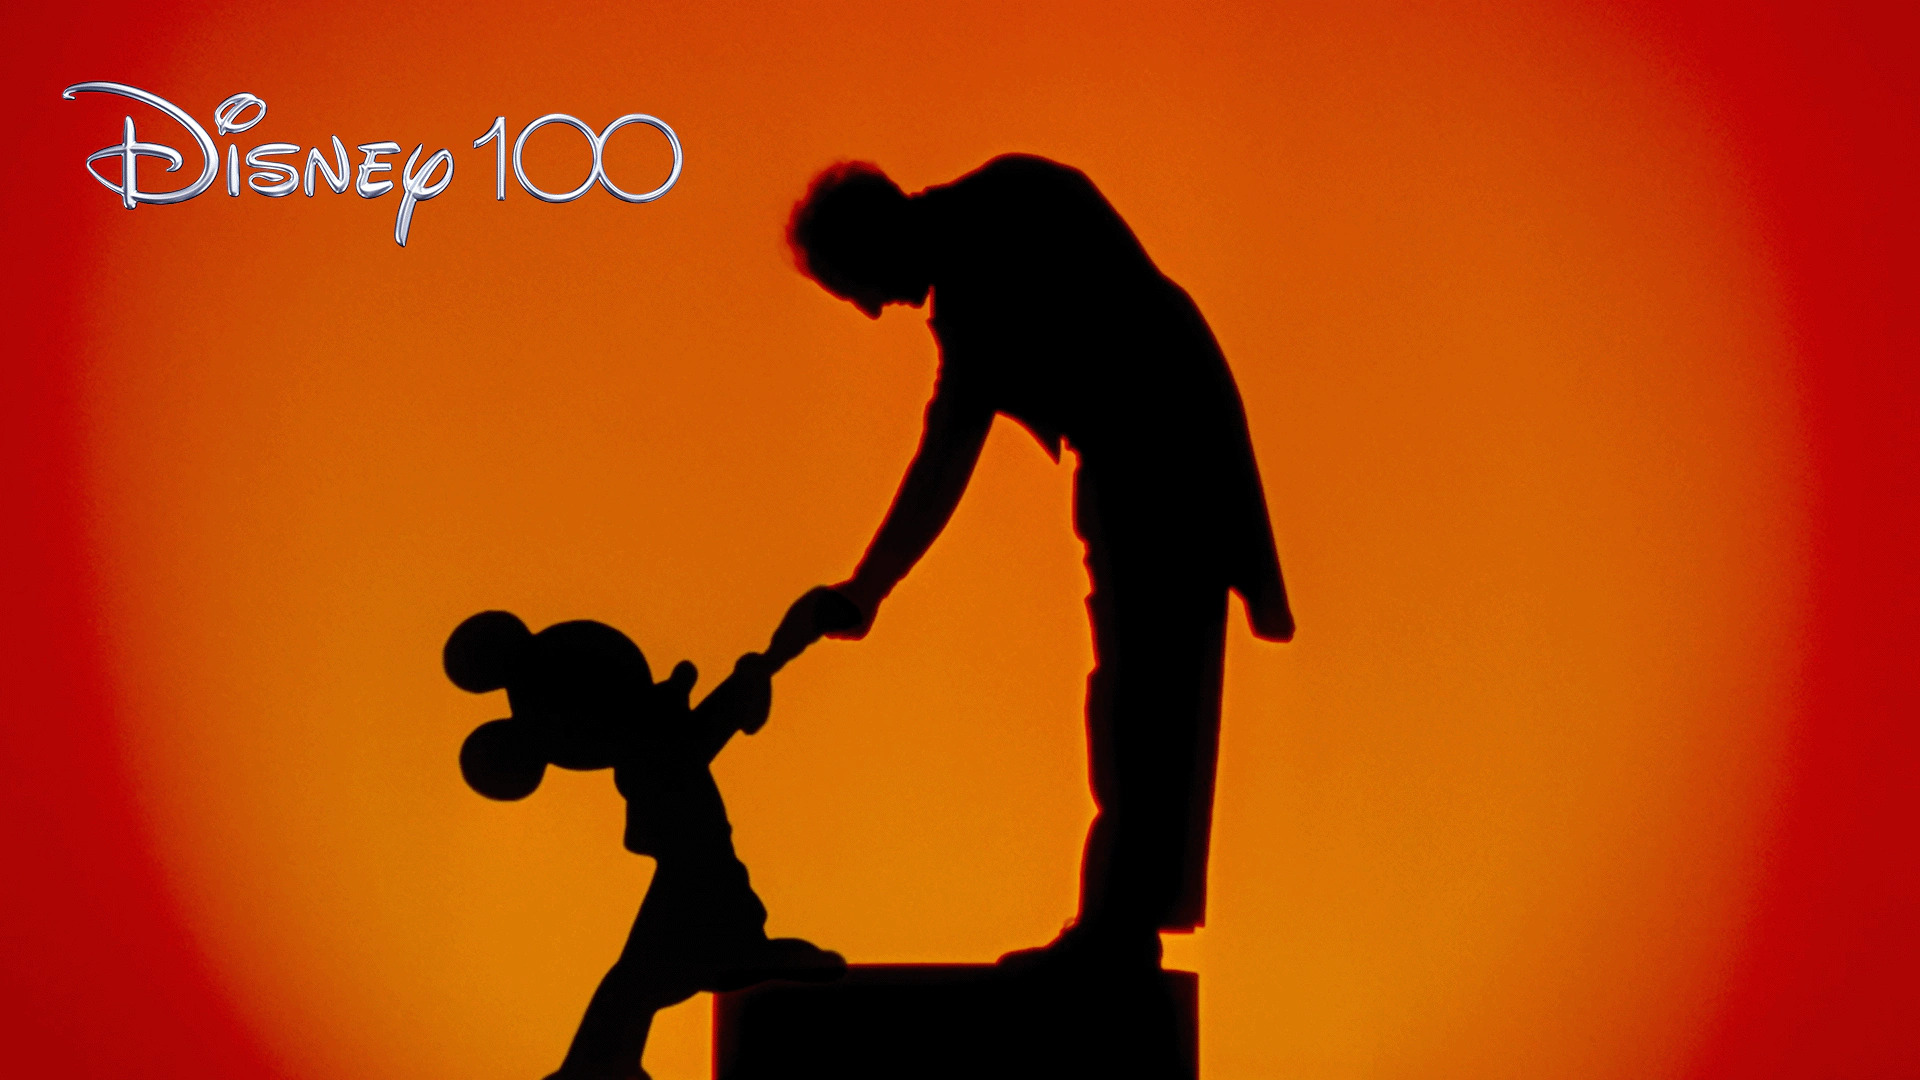 Celebrate Disney100 with this NEW Video